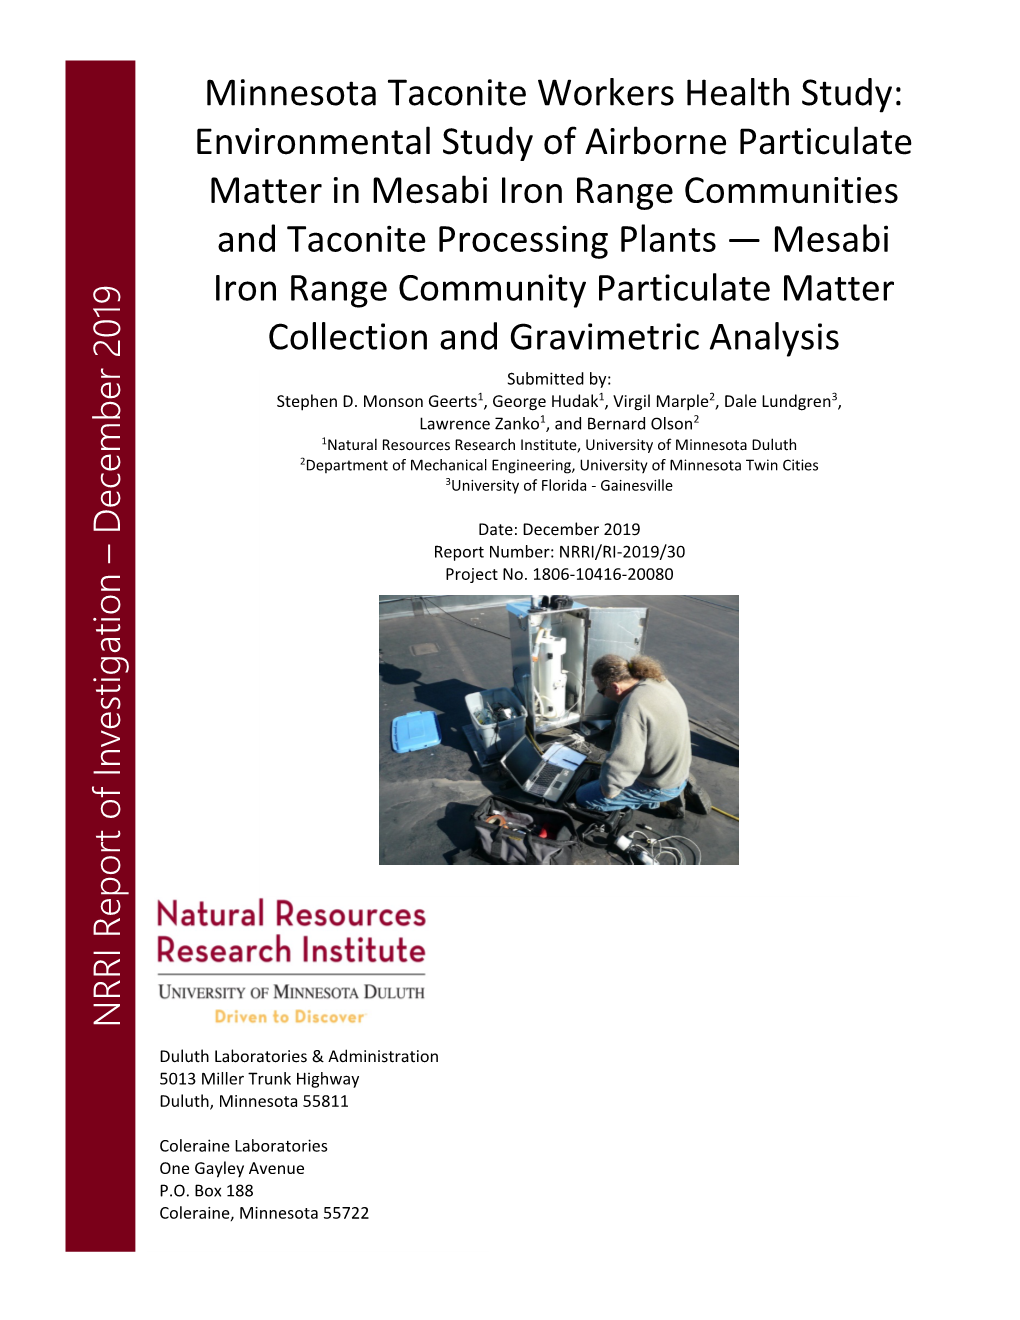 Environmental Study of Airborne Particulate Matter in Mesabi Iron